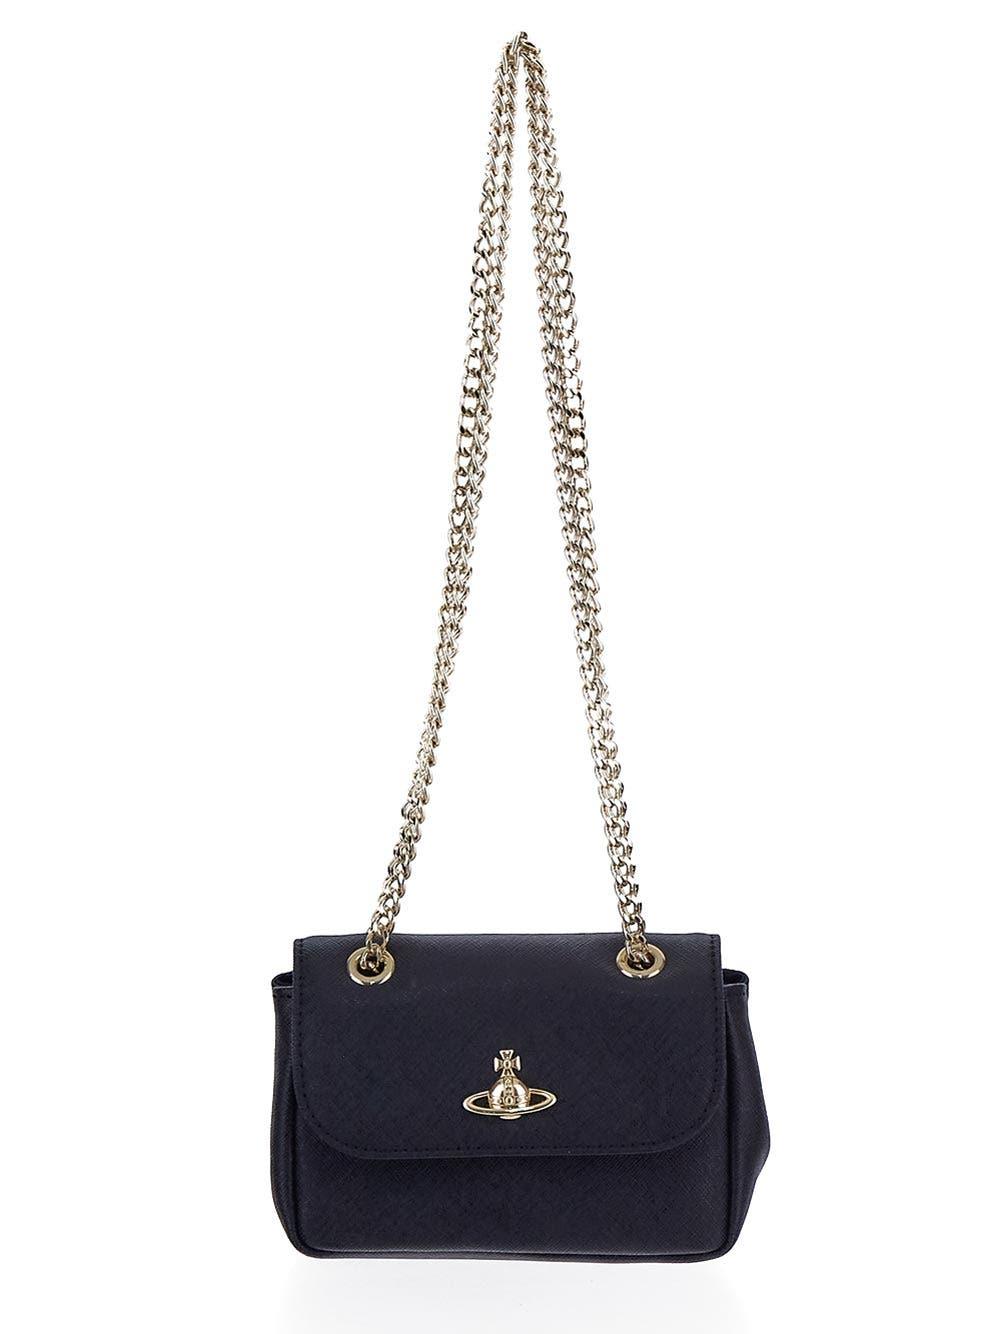 Vivienne Westwood Saffiano Small Purse With Chain in Blue | Lyst